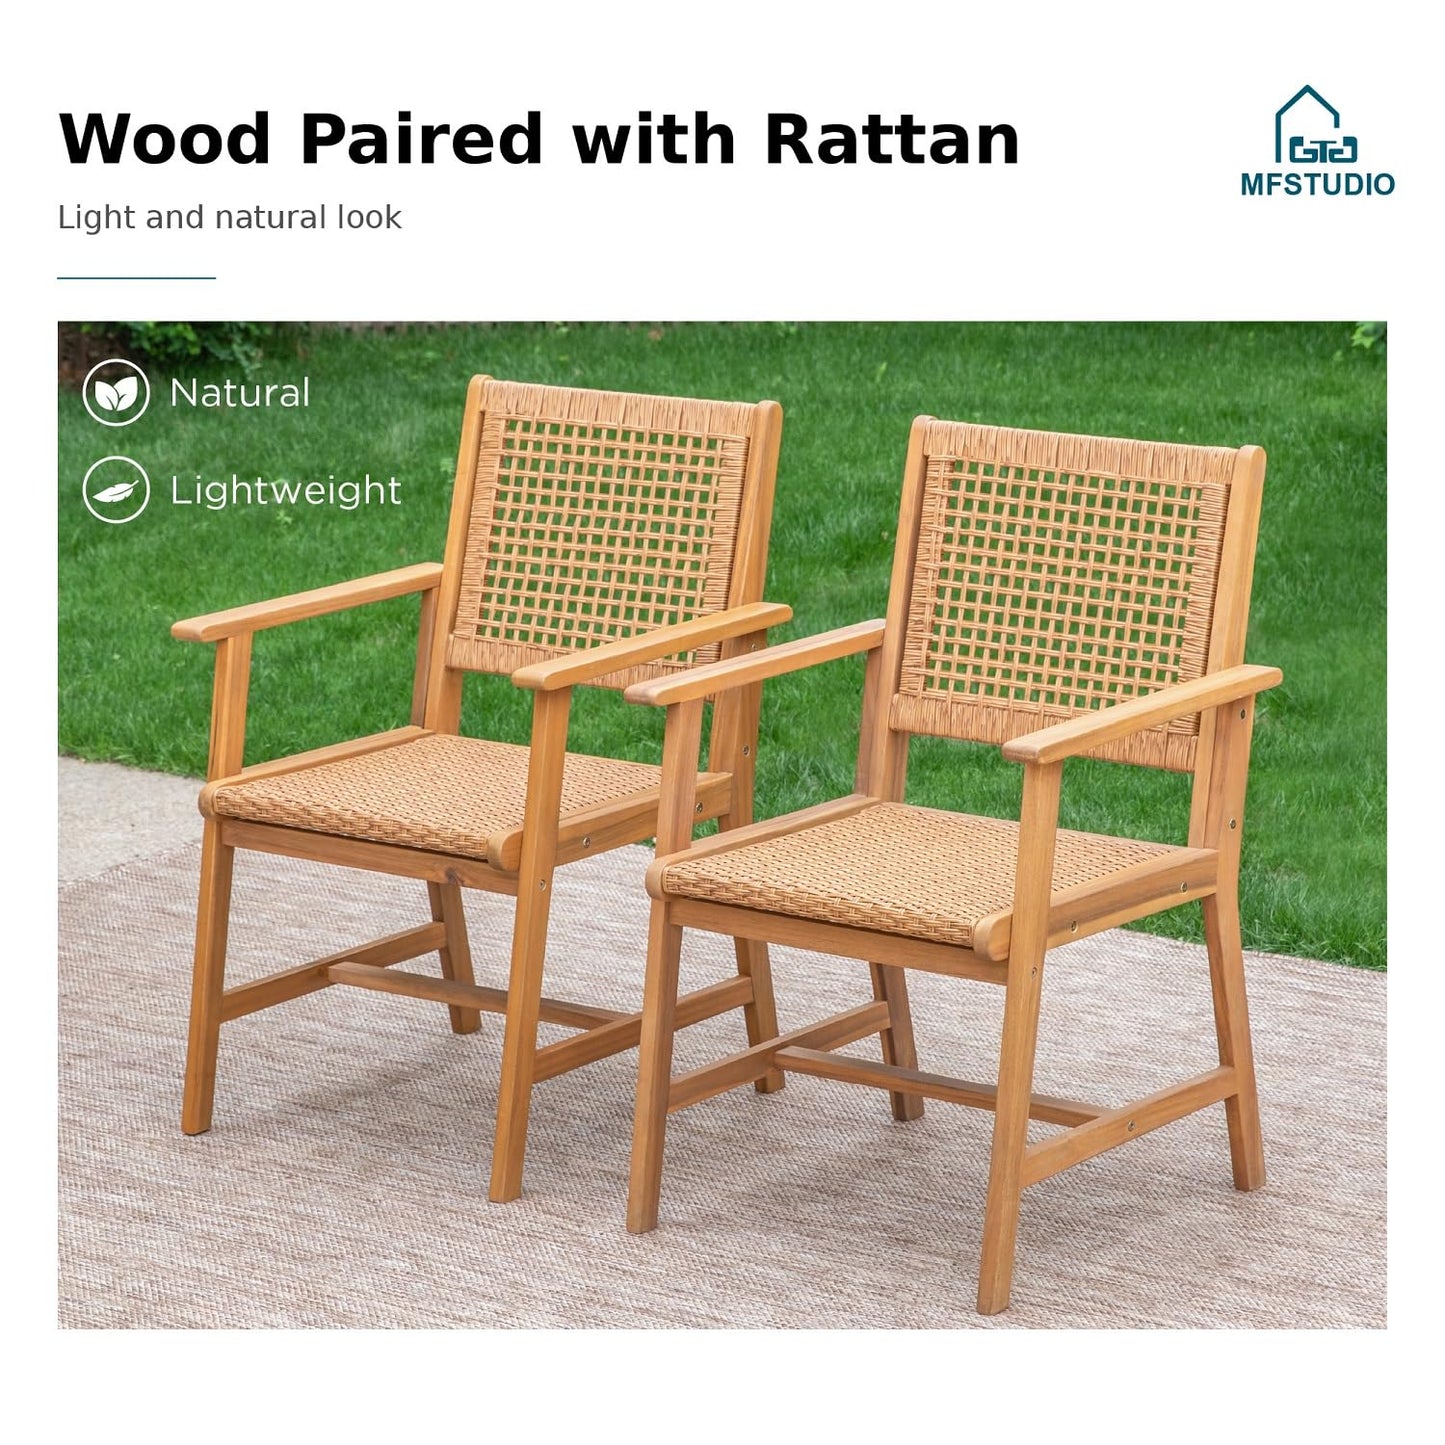 MFSTUDIO 5 Pieces Wood Patio Dining Set, Outdoor Patio Table Chairs Set for 4, Square Acacia Wood Patio Table, 4 x Acacia Wood Patio Chairs with Woven Rattan Design for Lawn, Garden, Backyard